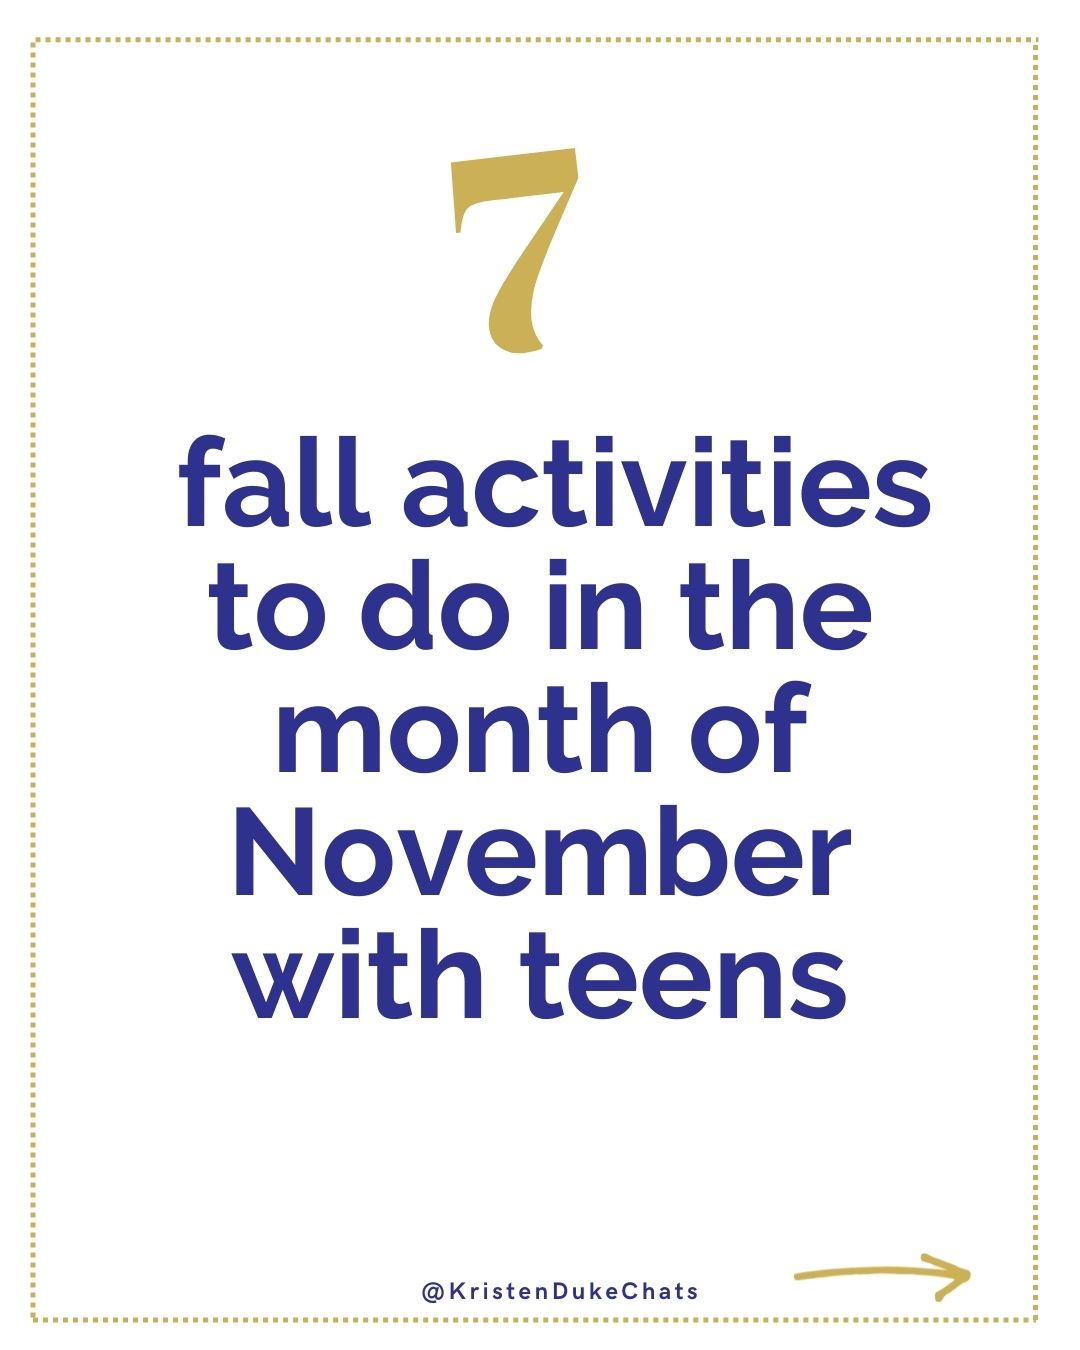 7 fall activities to do in the month of November with teens